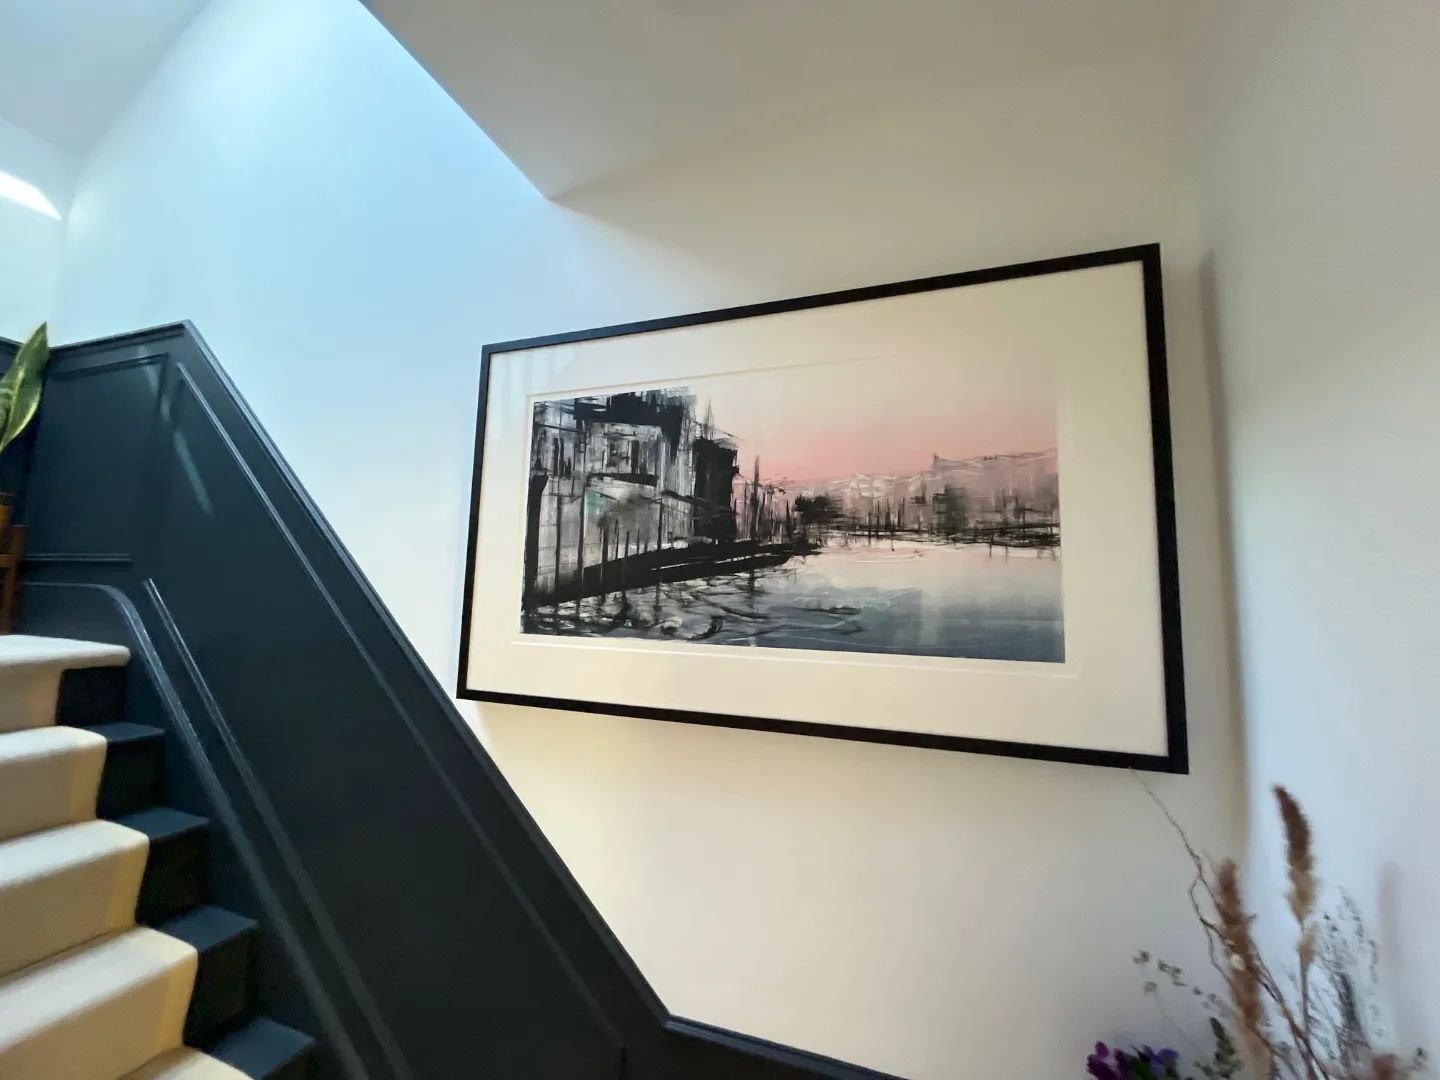 Delighted to see a snap shot of 'Immortal Reflections No1' acquired @affordableartfairuk in Battersea last autumn now hanging in its new abode. It's rare to see where my work finally resides, and l am thankful to these wonderful art collectors for th